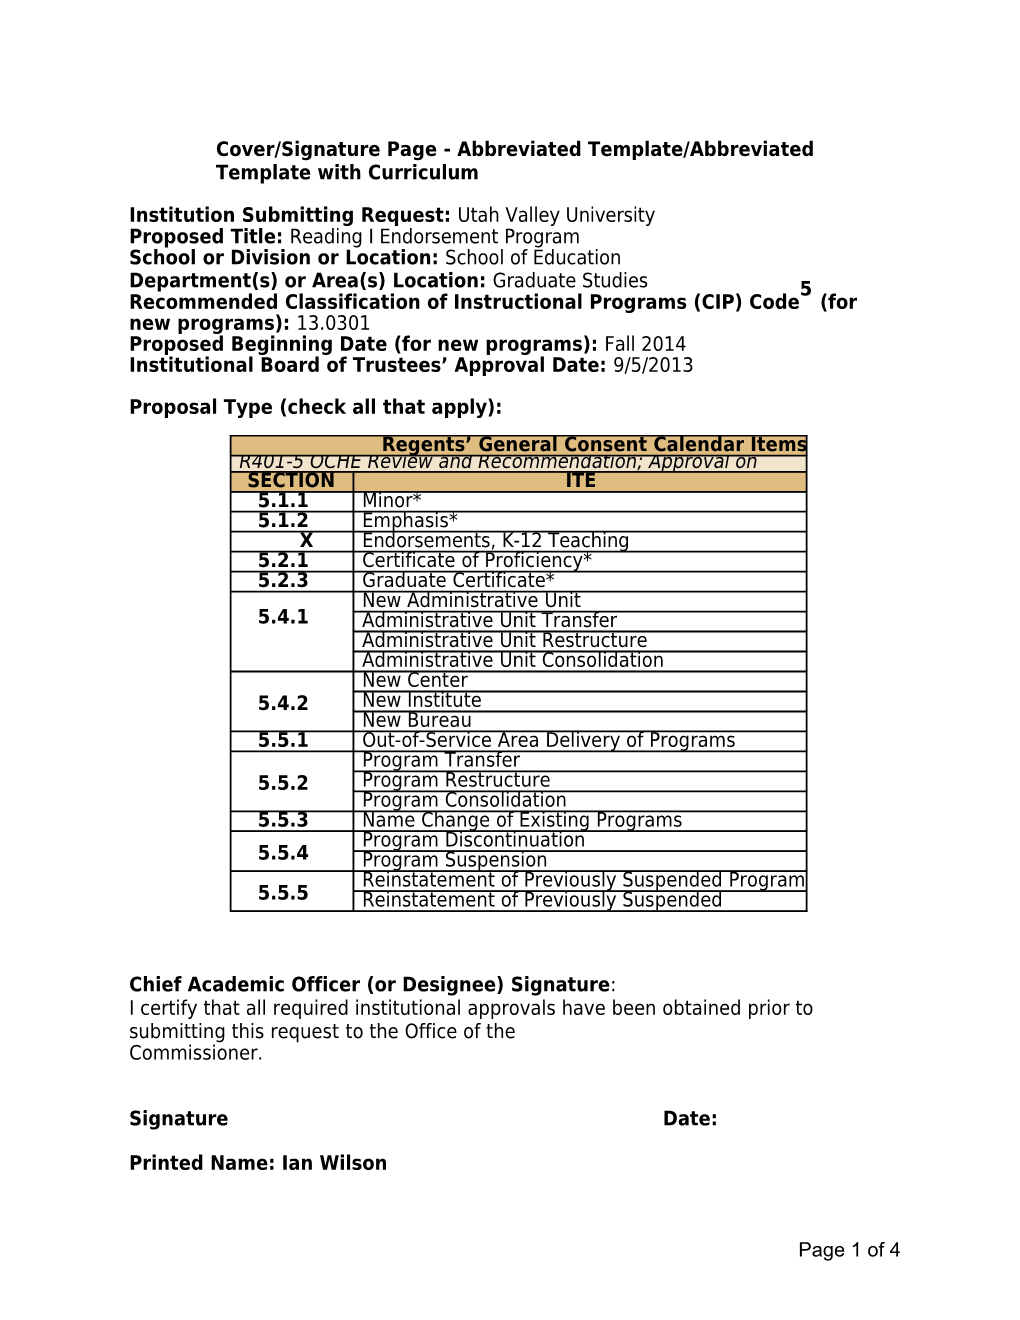 Cover/Signature Page- Abbreviated Template/Abbreviated Templatewith Curriculum